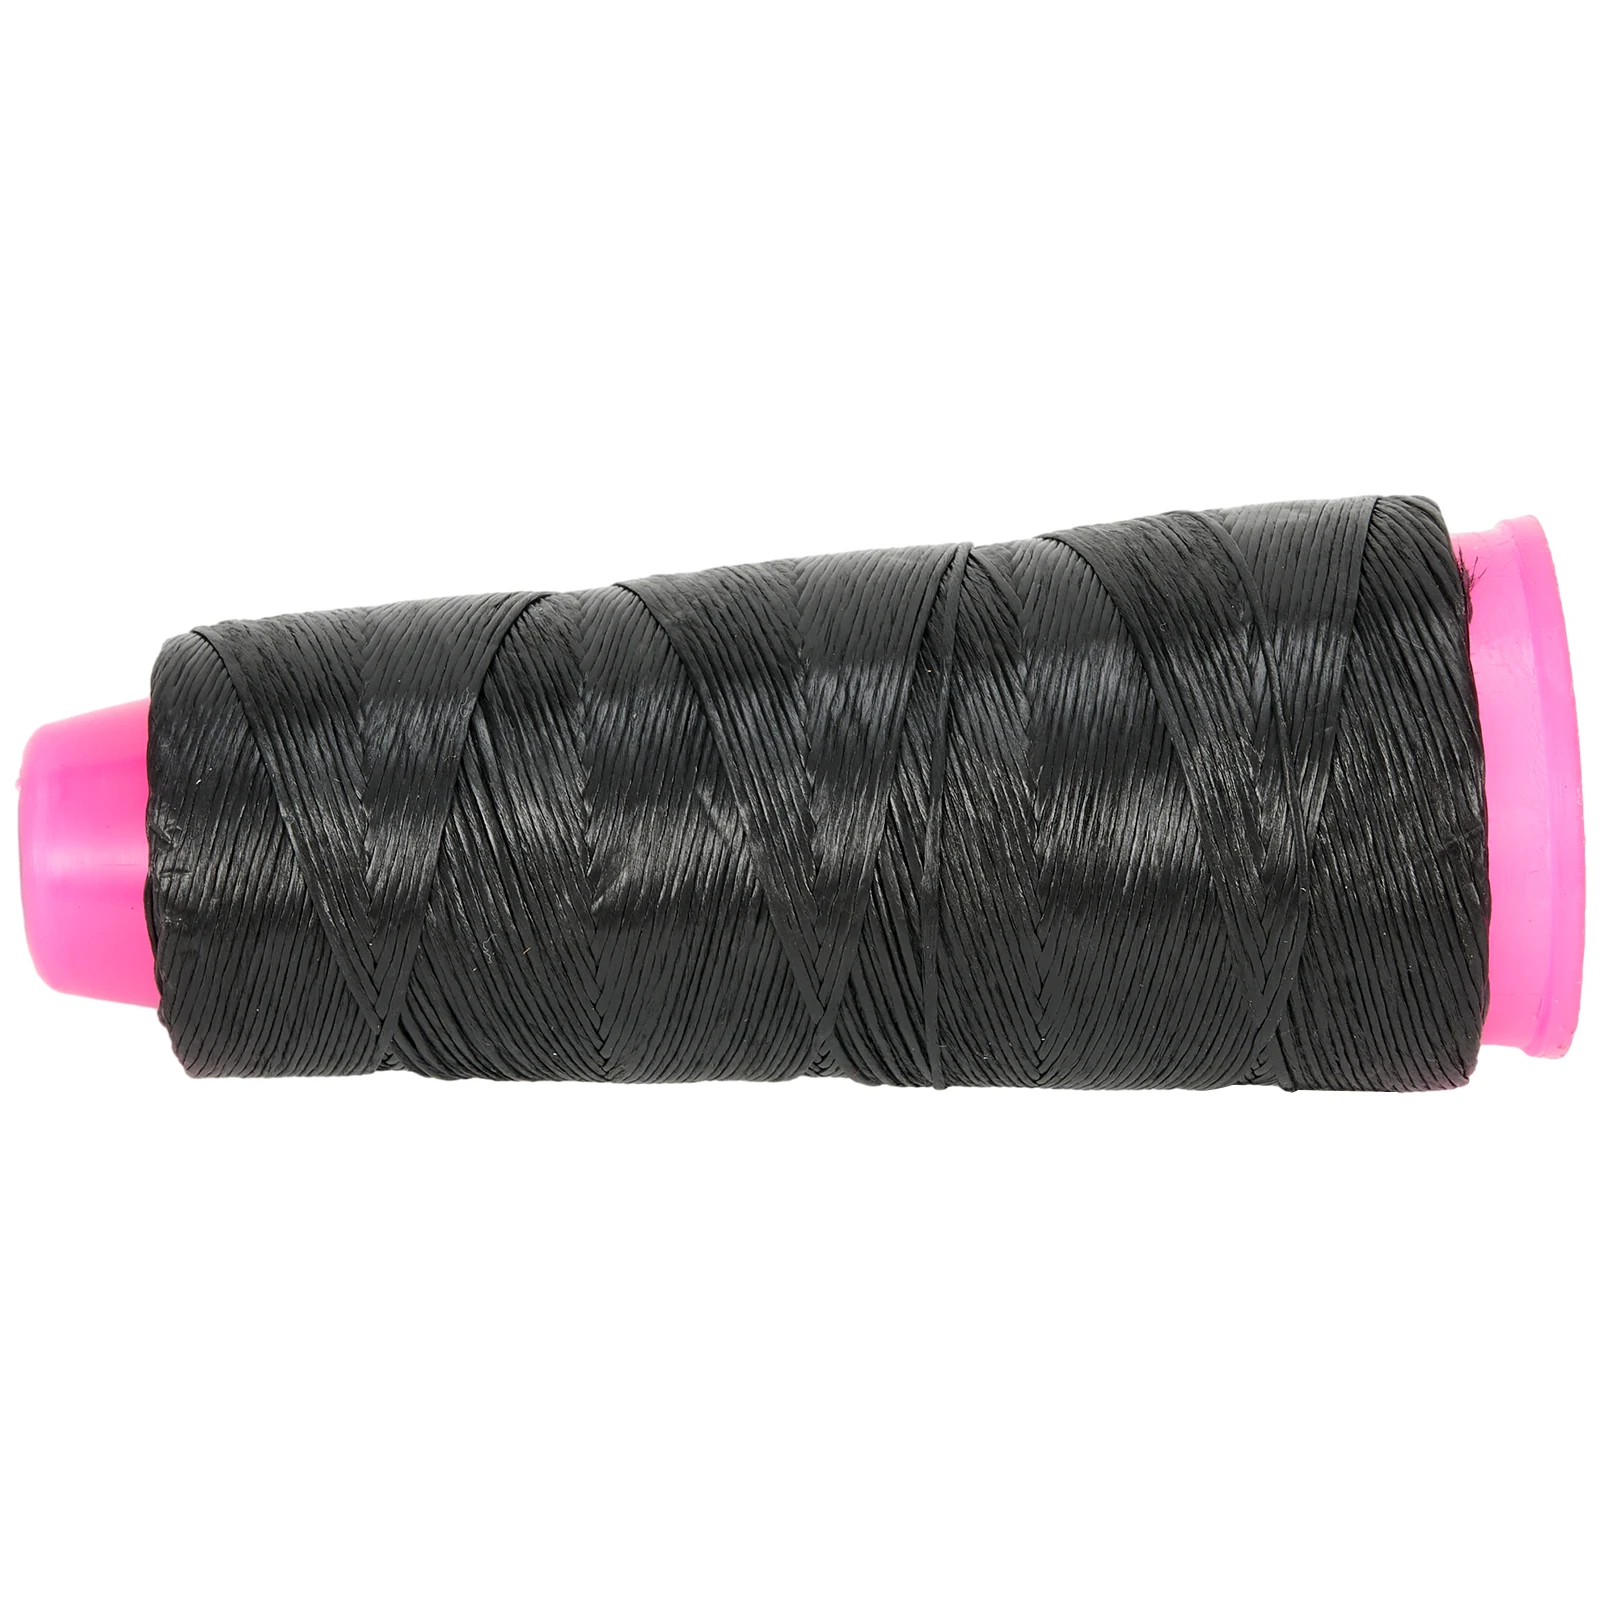 

Bow String Archery Bowstring Length 120mm Outdoor Part Recurve Longbow Rope Weight 40g Diameter 0.8mm Not Easy Fluff